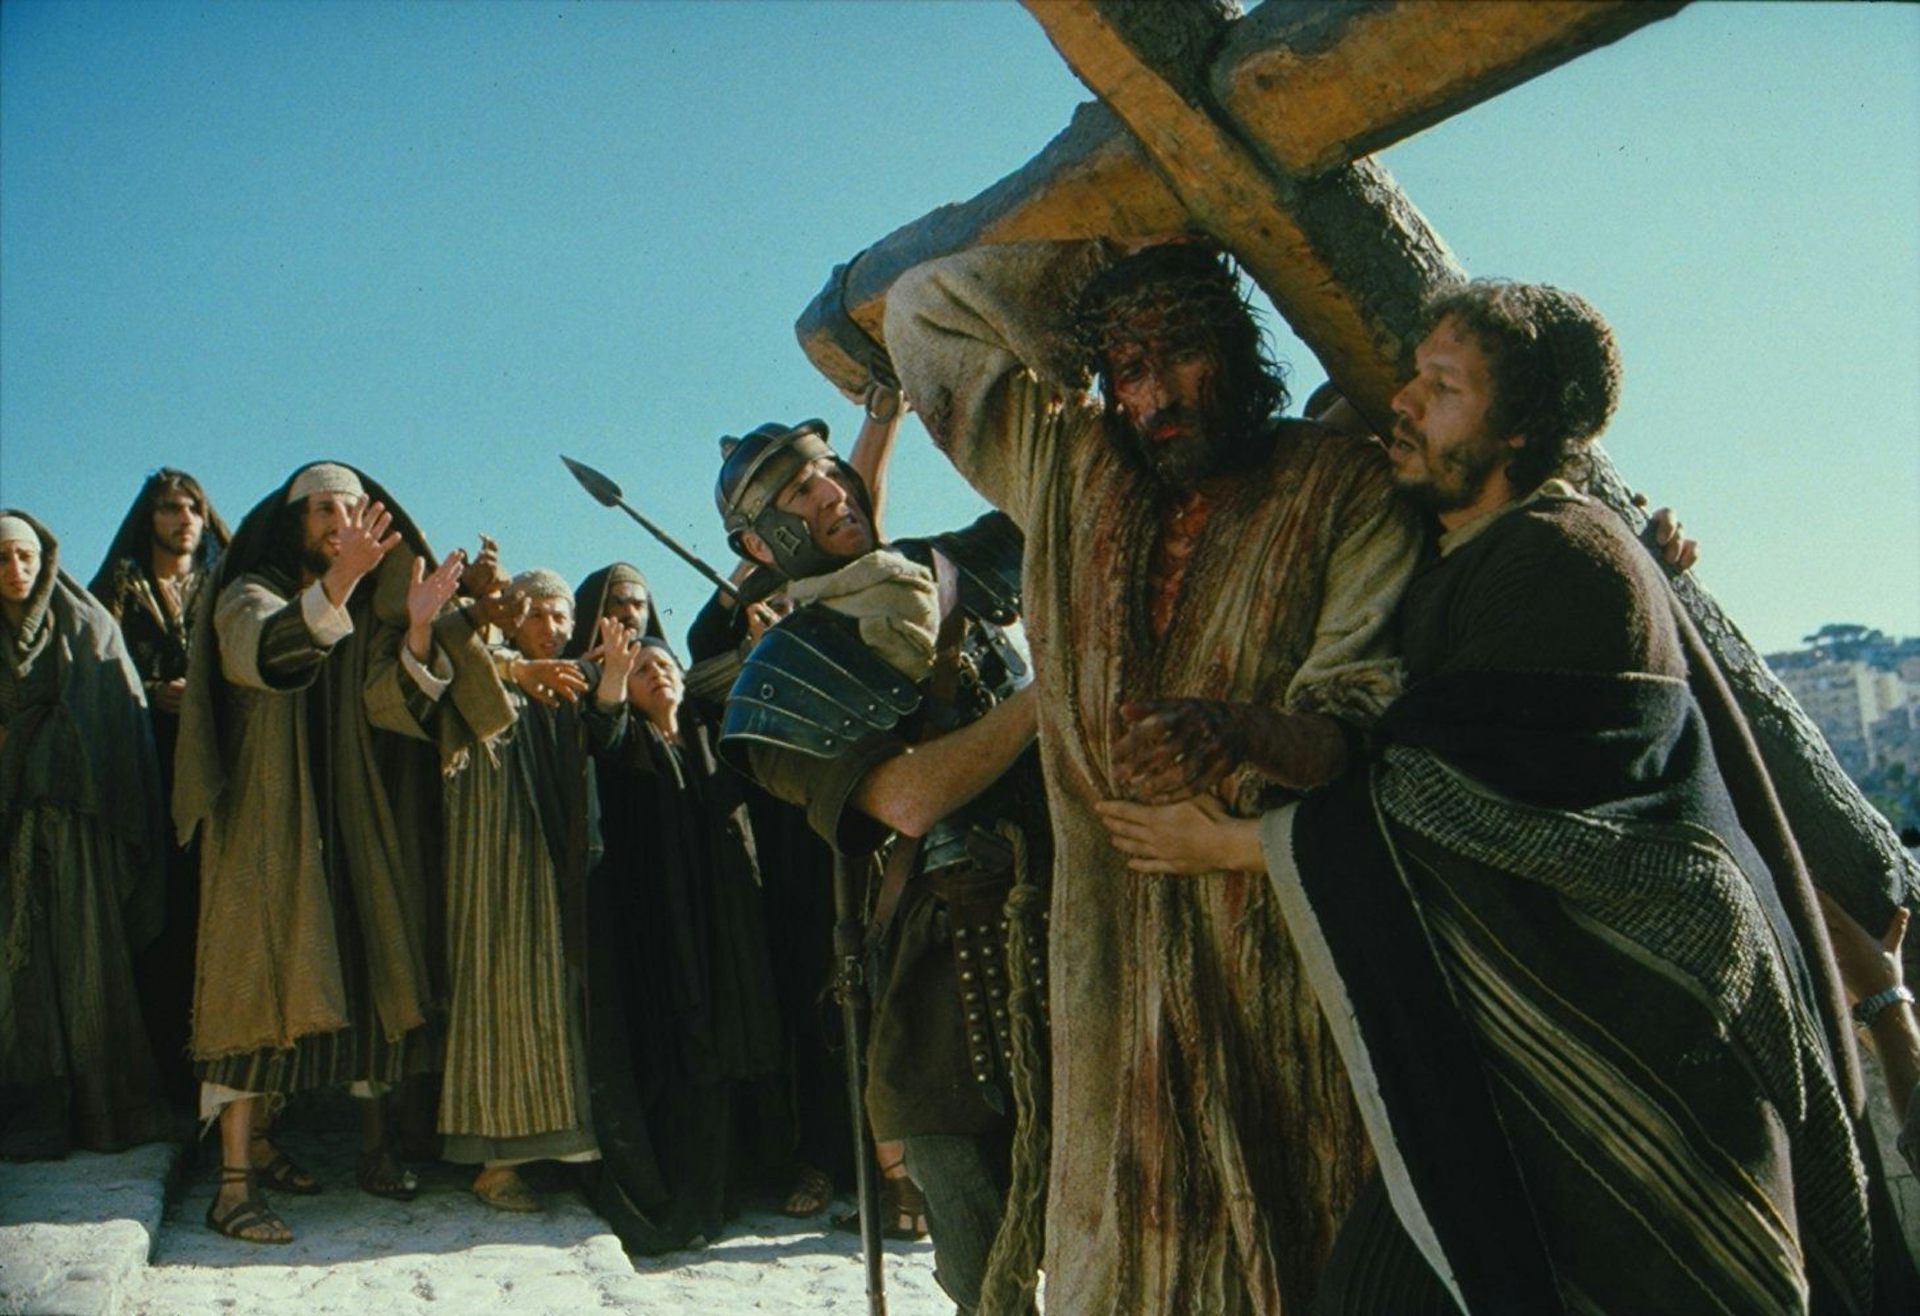 son of god and the passion of christ movie scenes